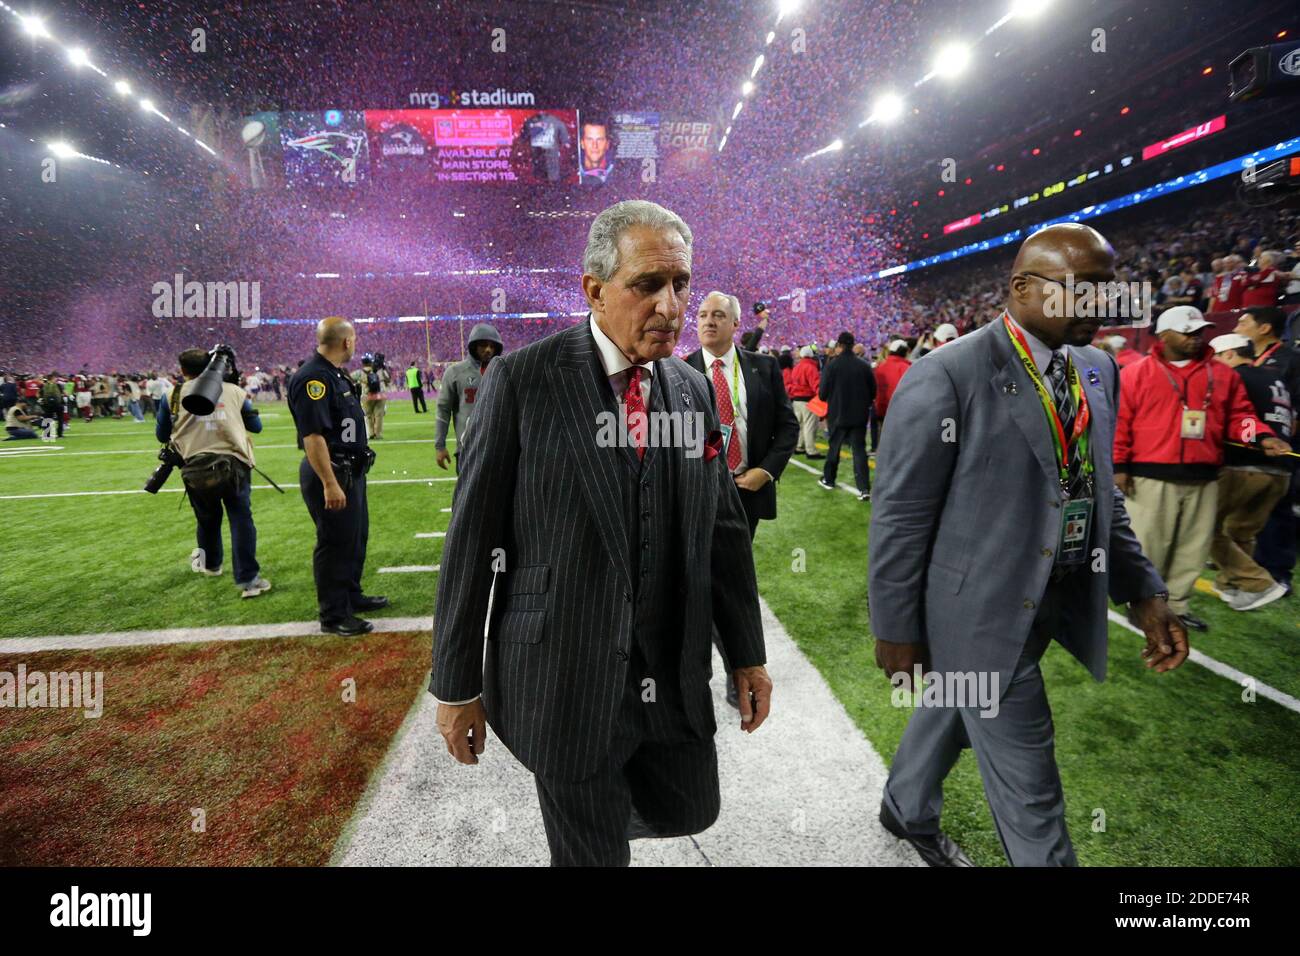 NO FILM, NO VIDEO, NO TV, NO DOCUMENTARY - Atlanta Falcons owner Arthur Blank leaves the field at the end of the game as the Atlanta Falcons meet the New England Patriots in Super Bowl LI on Sunday, February 5, 2017 at NRG Stadium in Houston, TX, USA. The Patriots beat the Falcons in overtime 34-28. Photo by Curtis Compton/Atlanta Journal-Constitution/TNS/ABACAPRESS.COM Stock Photo